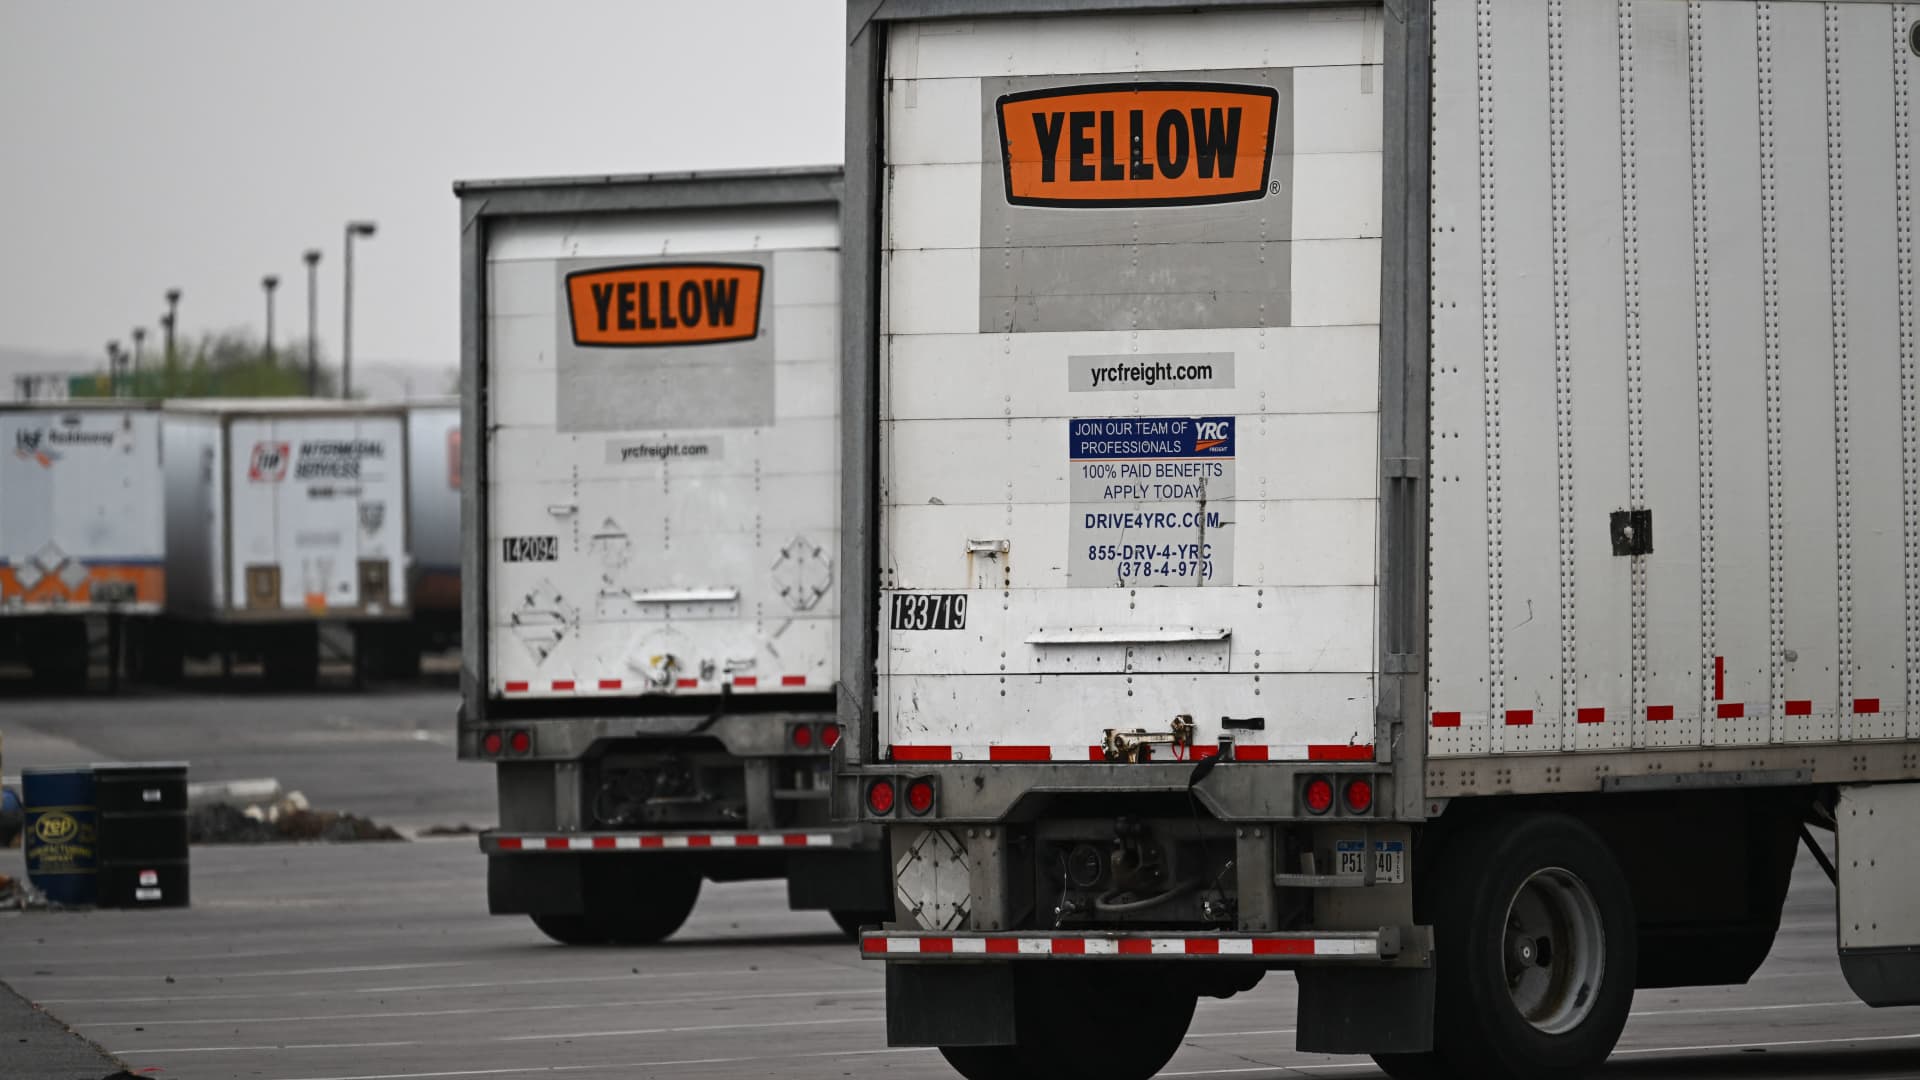 Bankrupt trucker Yellow repays $700 million Covid mortgage, as unsecured creditors press for billions more